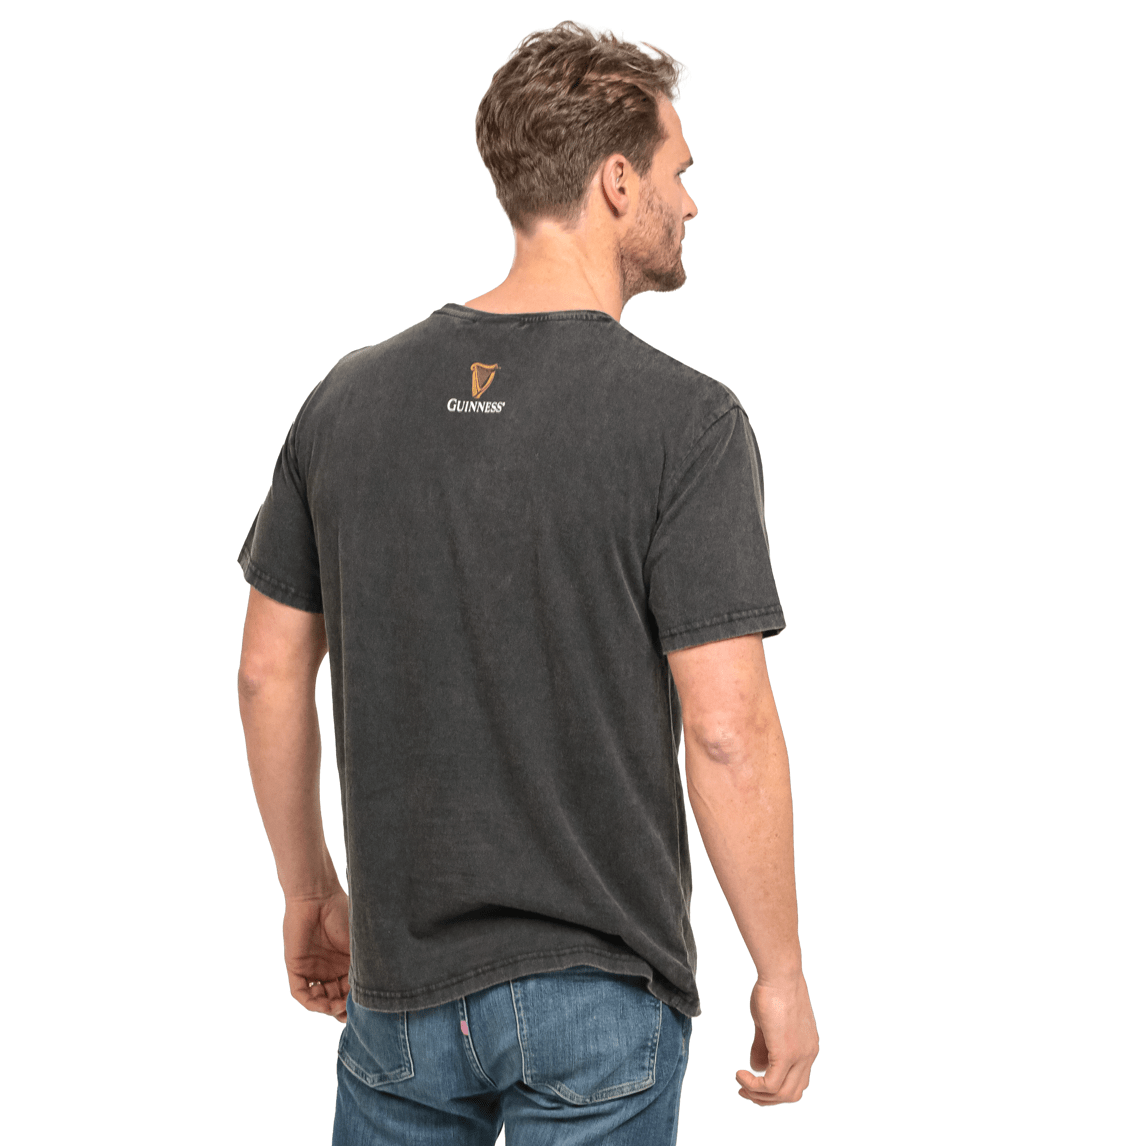 The man's back showcased a stylish Guinness UK Evolution Harp Tee, made of cotton fabric.